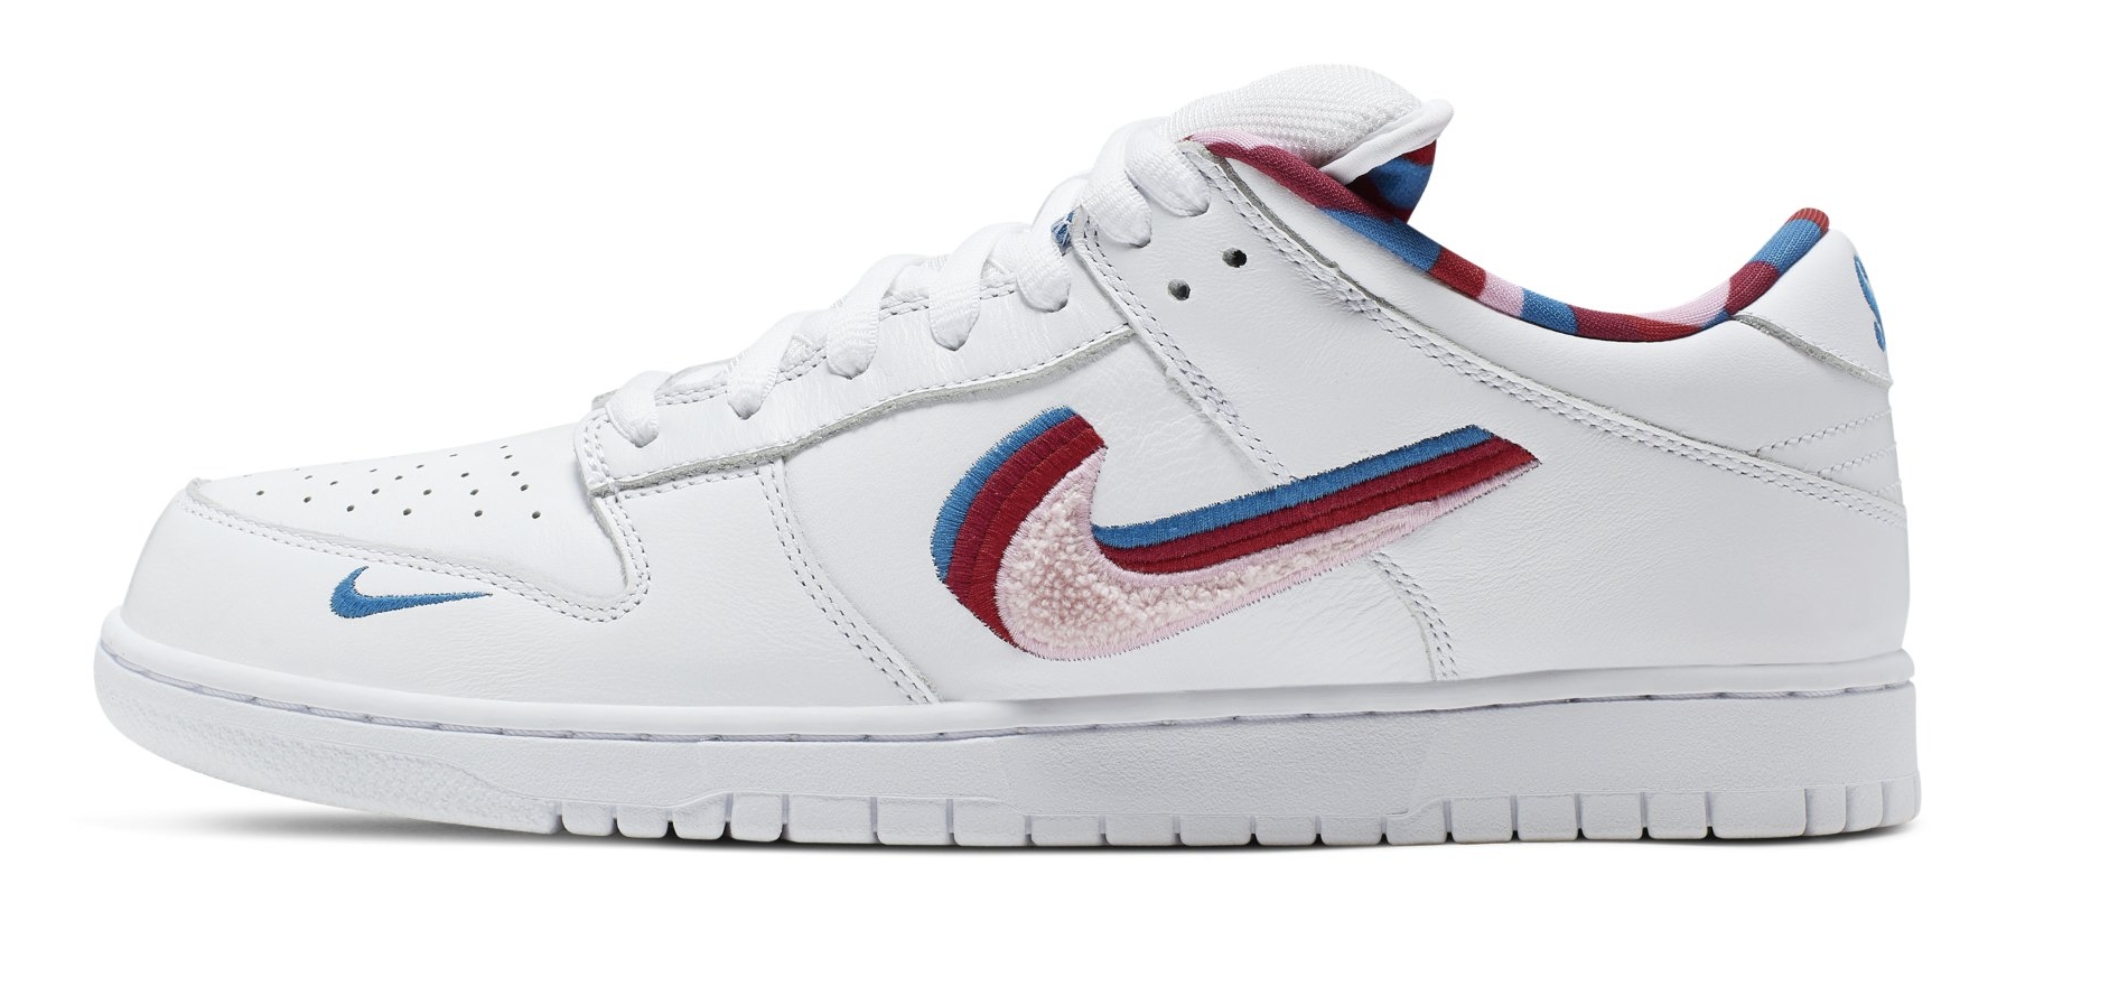 best nike dunks of all time